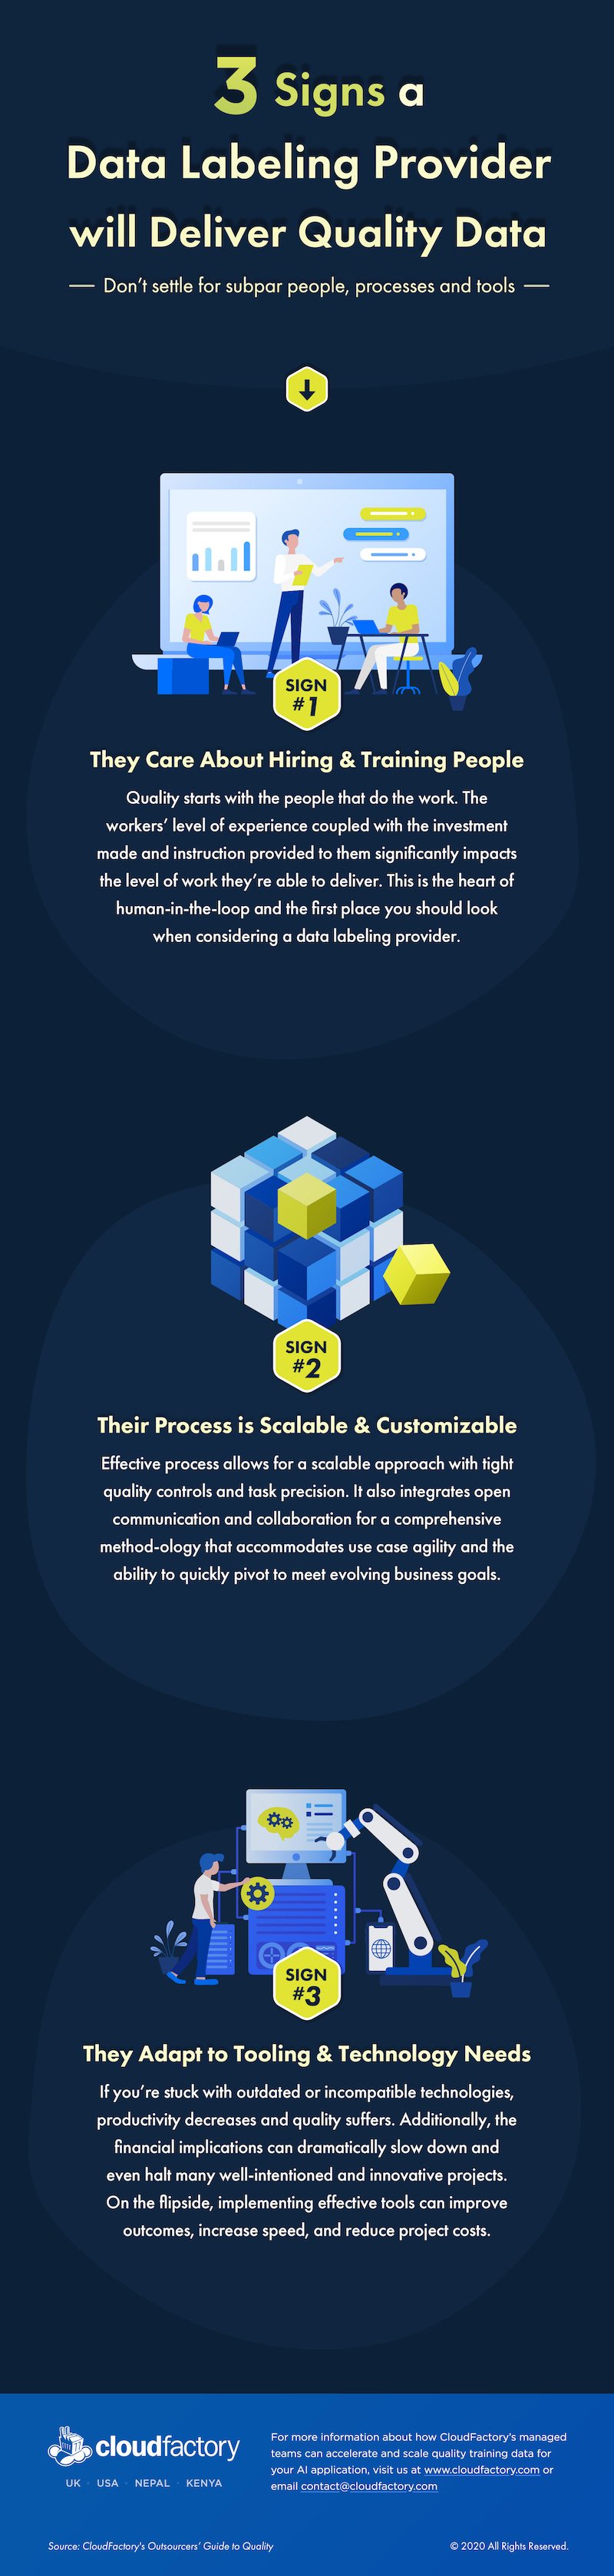 3 Signs Data Labeling Provider Delivers Quality Data - Infographic 